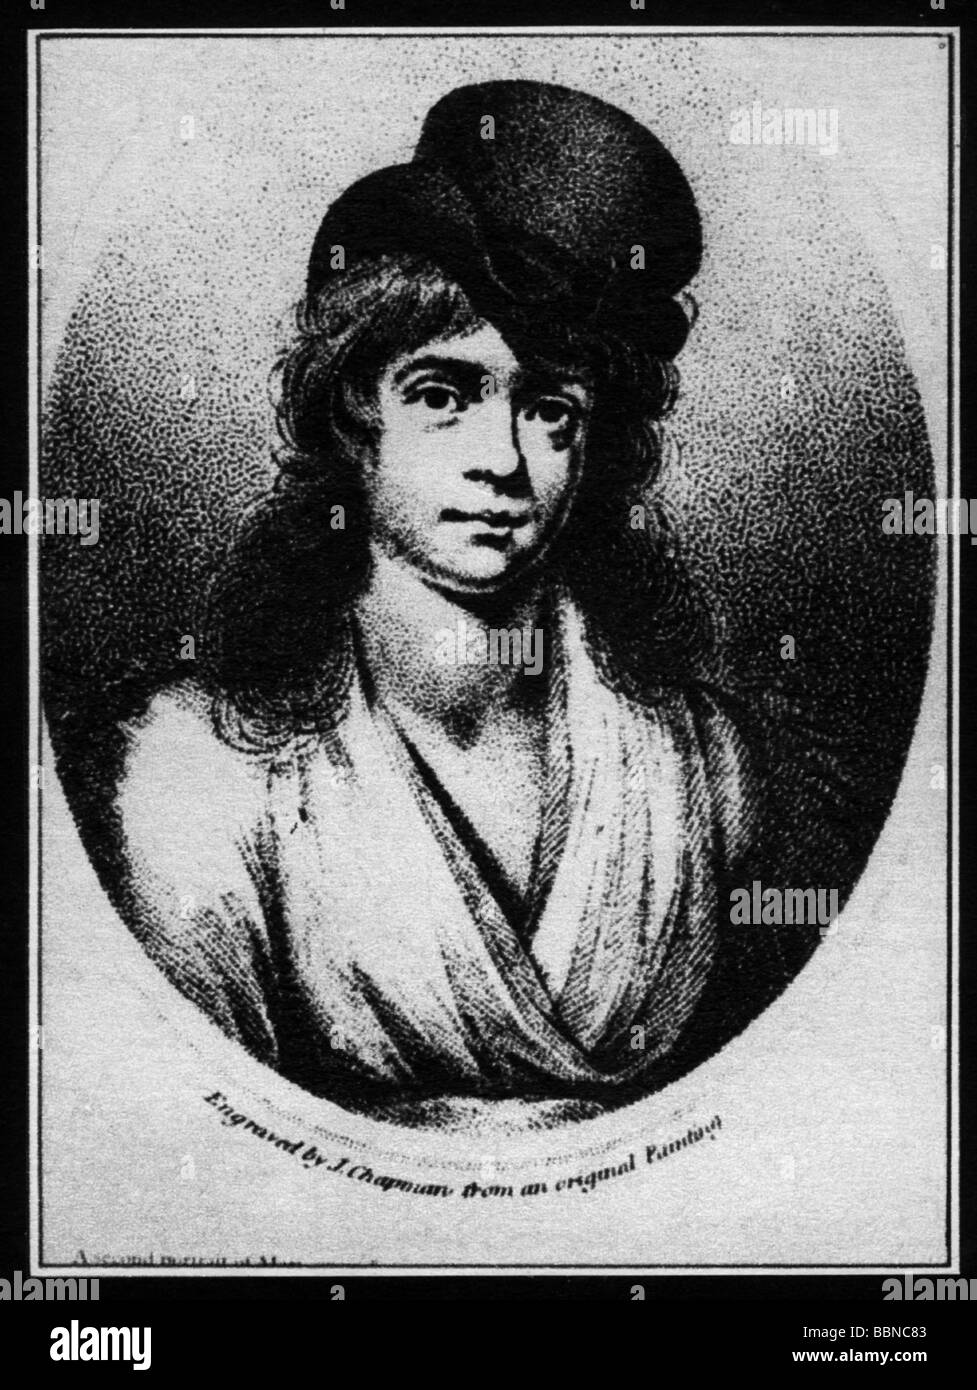 Wollstonecraft, Mary, 27.4. 1759 - 10.9.1797, English author / writer, portrait, wearing clothes in the style of the French revolutionaries, engraving by Chapman after painting, Stock Photo